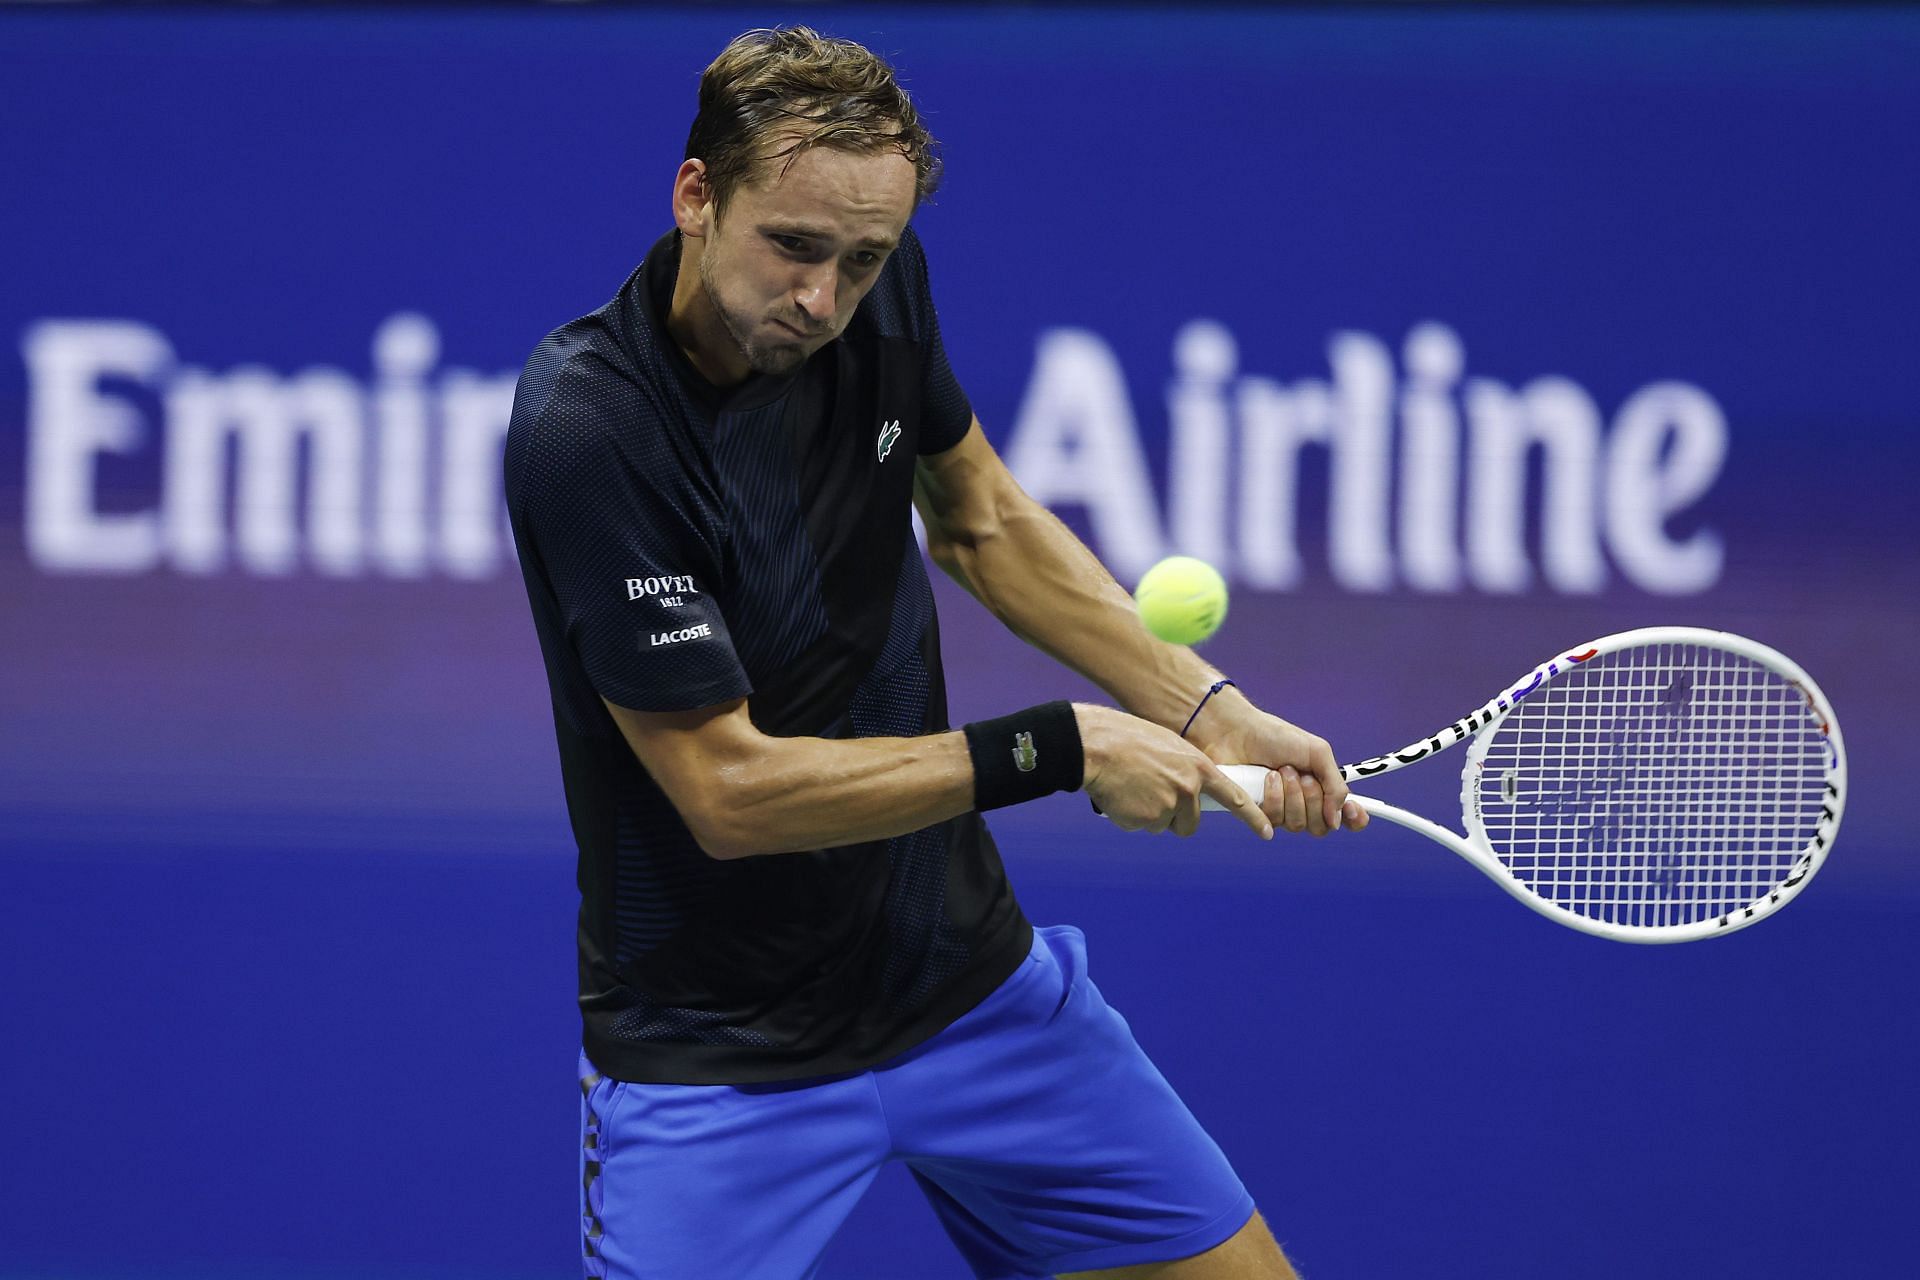 Daniil Medvedev in action at the 2022 US Open - Day 5